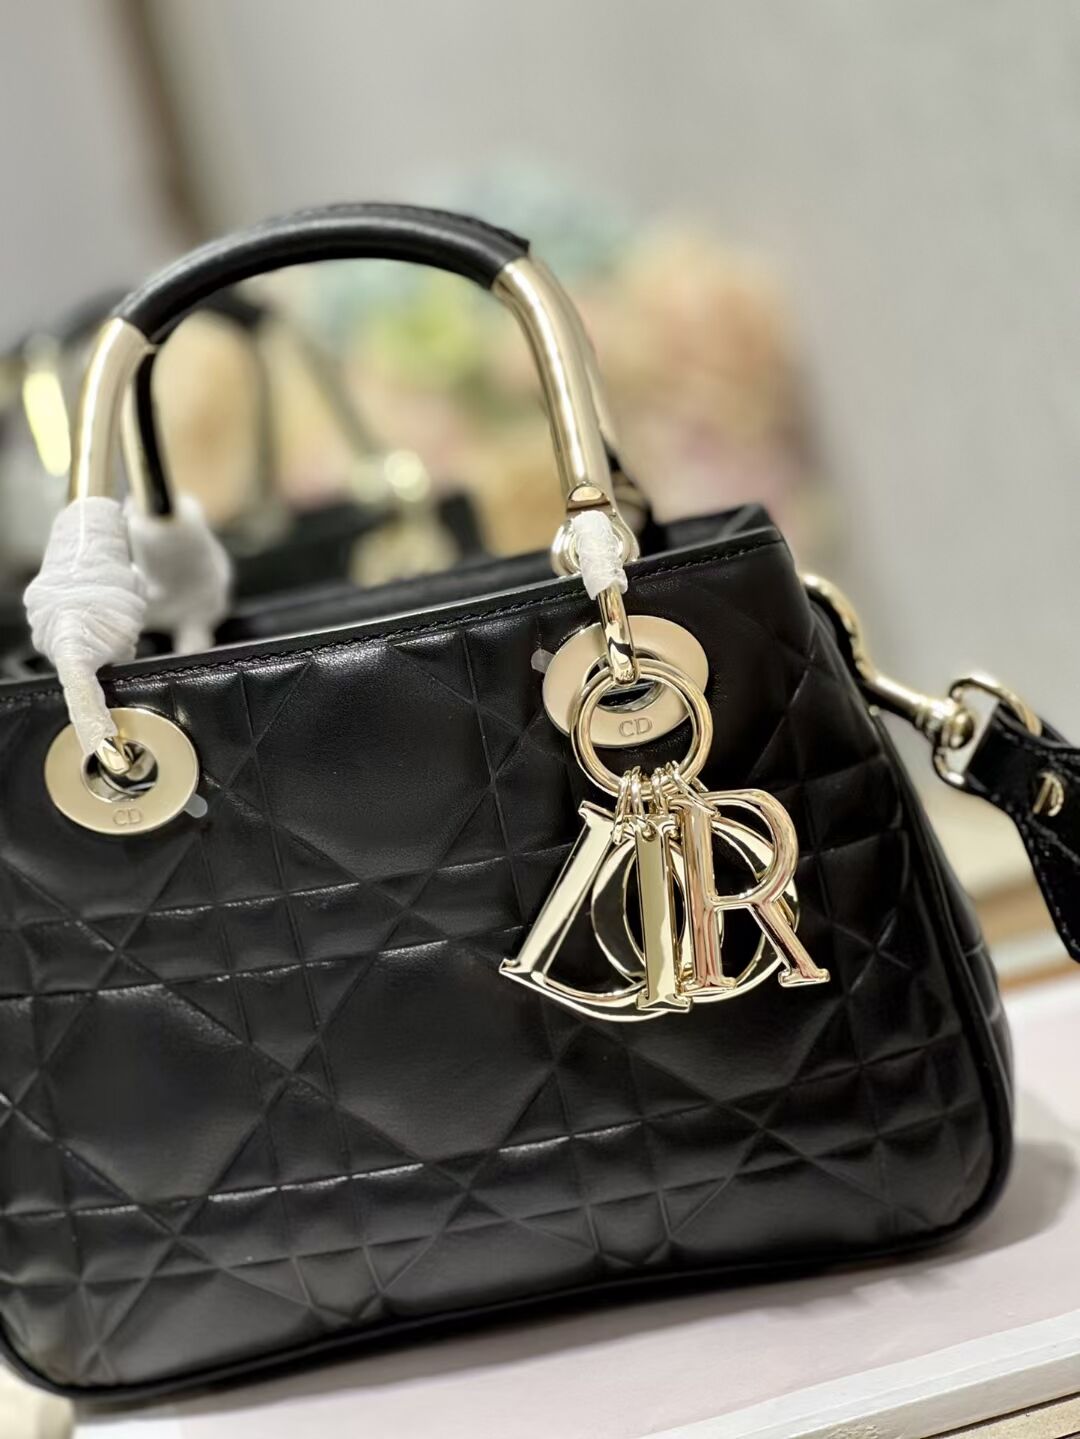 LADY DIOR TOP HANDLE SMALL BAG Latte Cannage Lambskin C9228 BLACK&GOLD